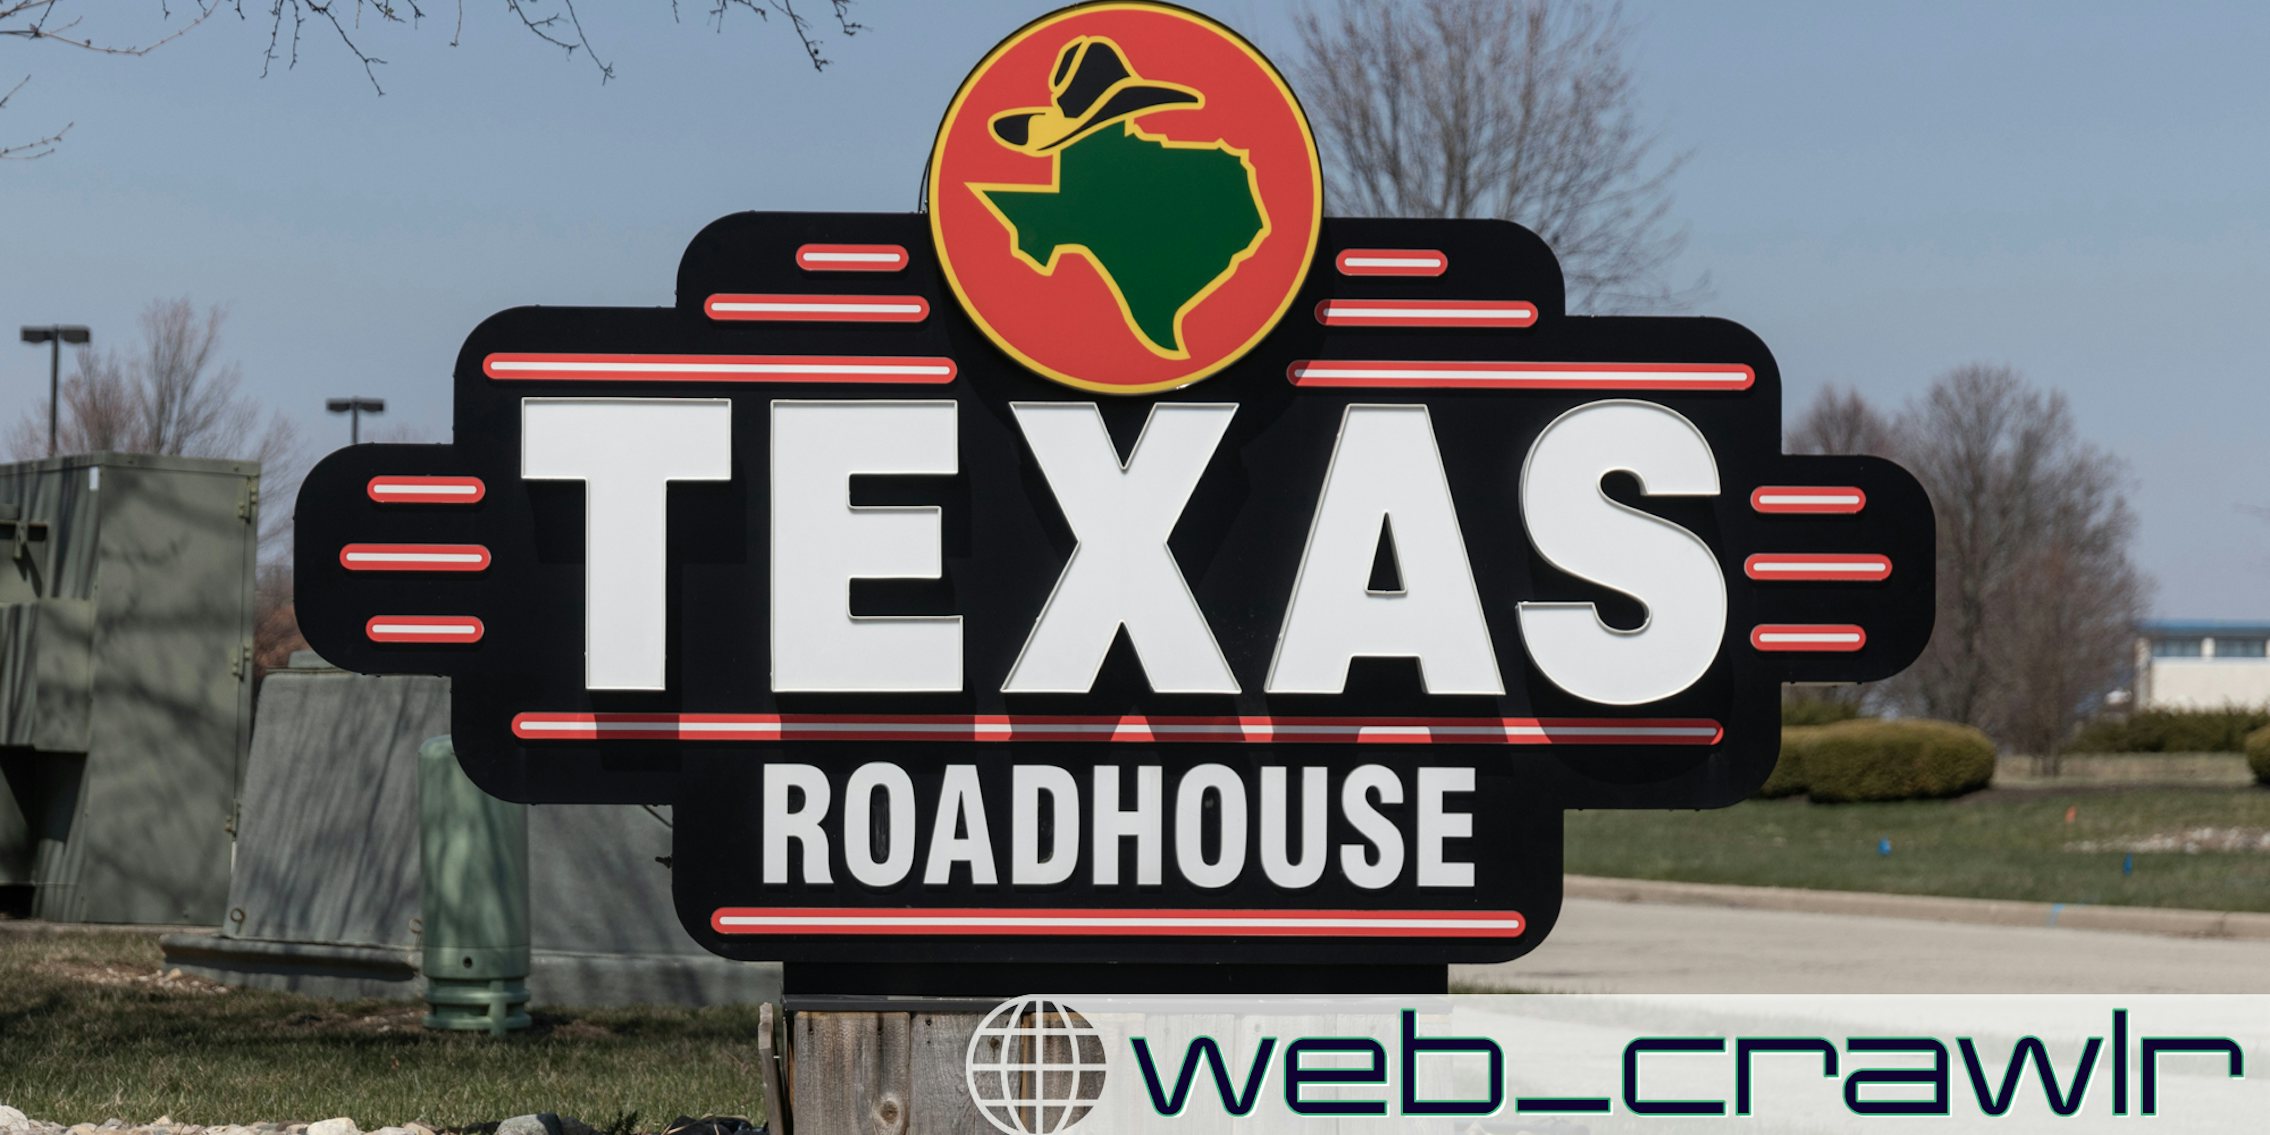 A Texas Roadhouse sign. The Daily Dot newsletter web_crawlr logo is in the bottom right corner.